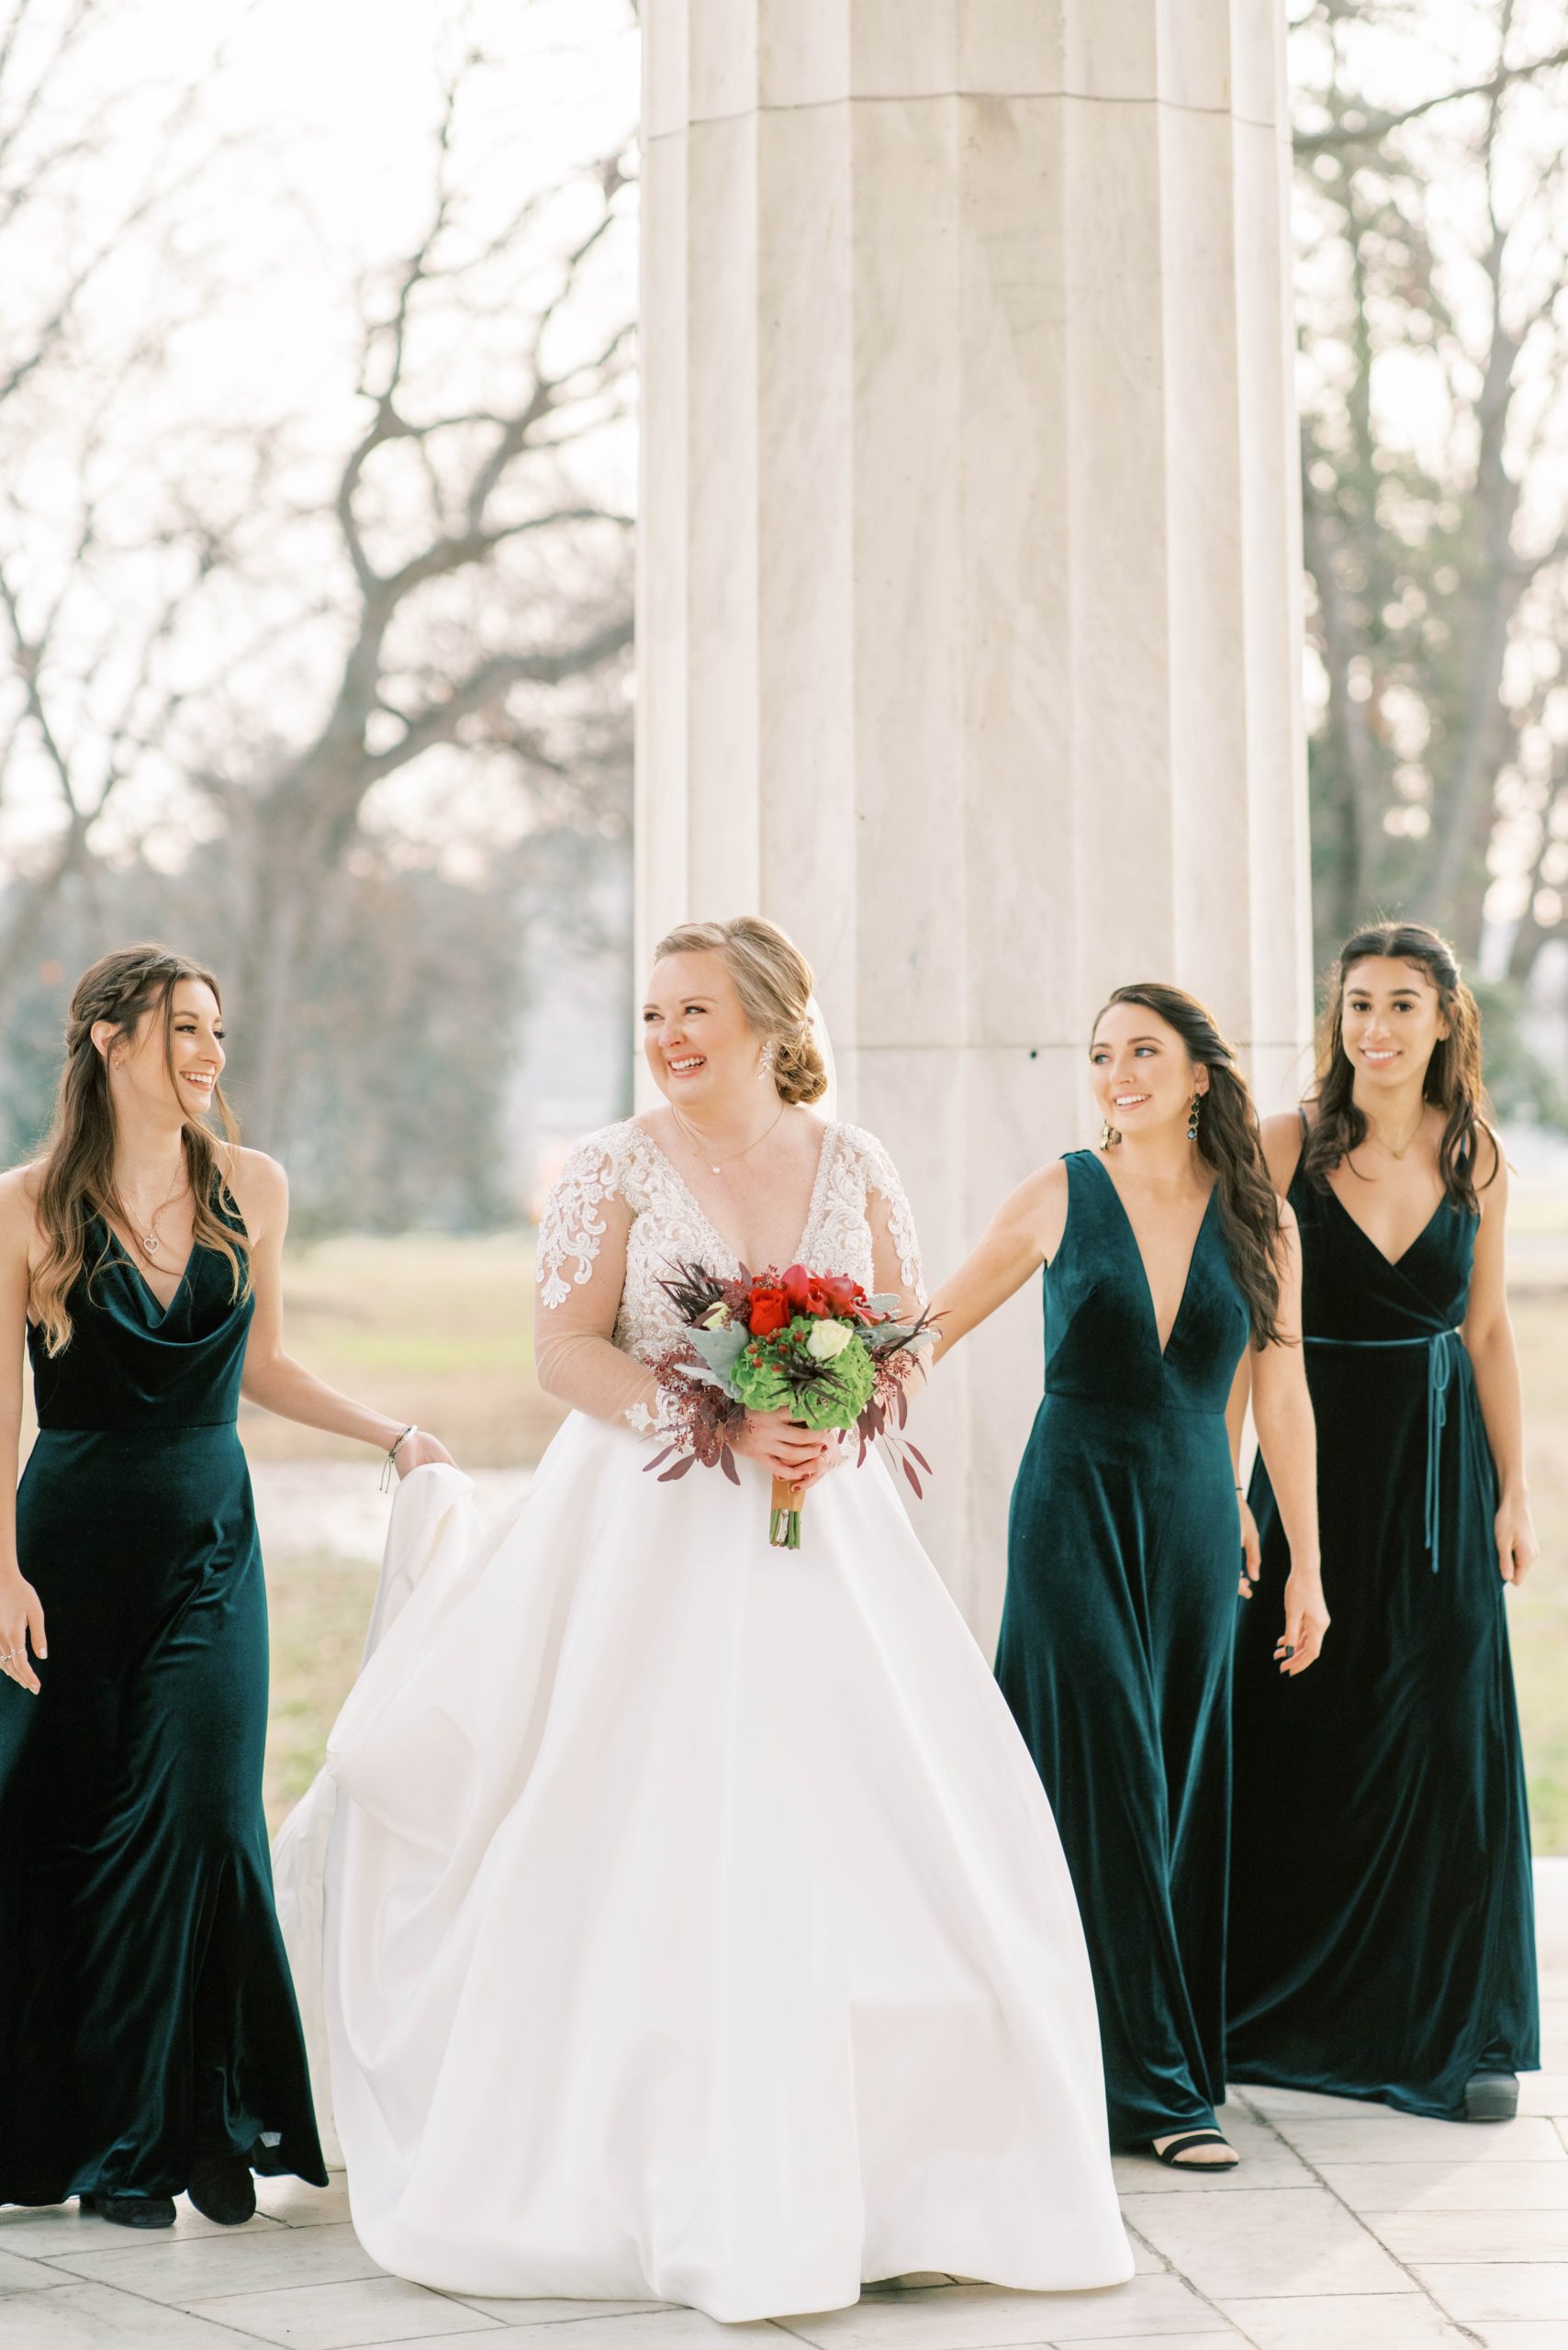 A wintery wedding elopement at the DC War Memorial in Washington, DC with portraits at the Lincoln Memorial and Washington Monument.